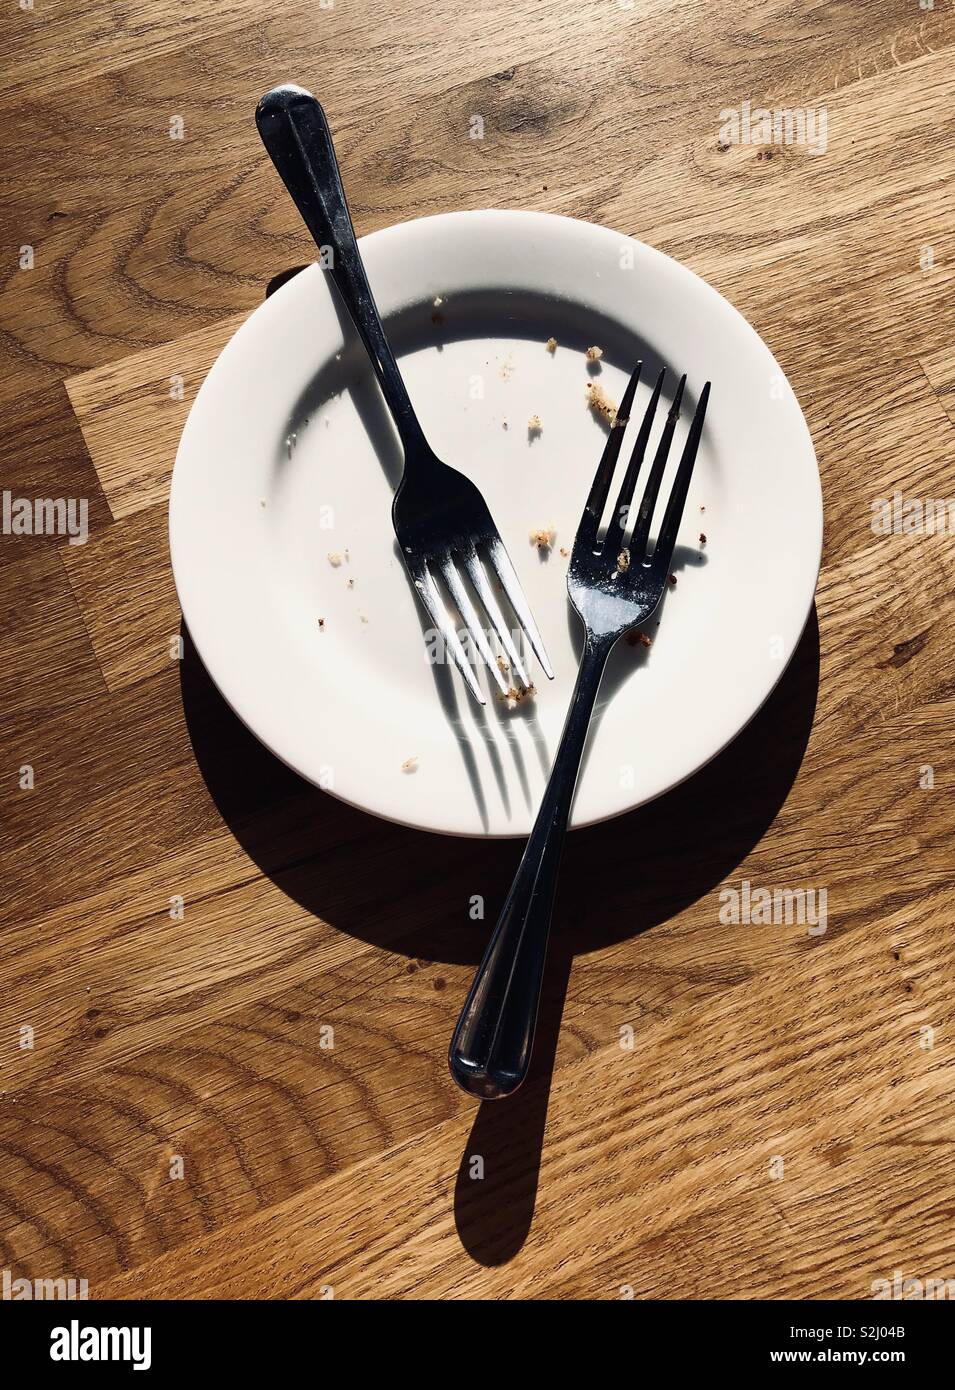 Two forks on an empty plate Stock Photo